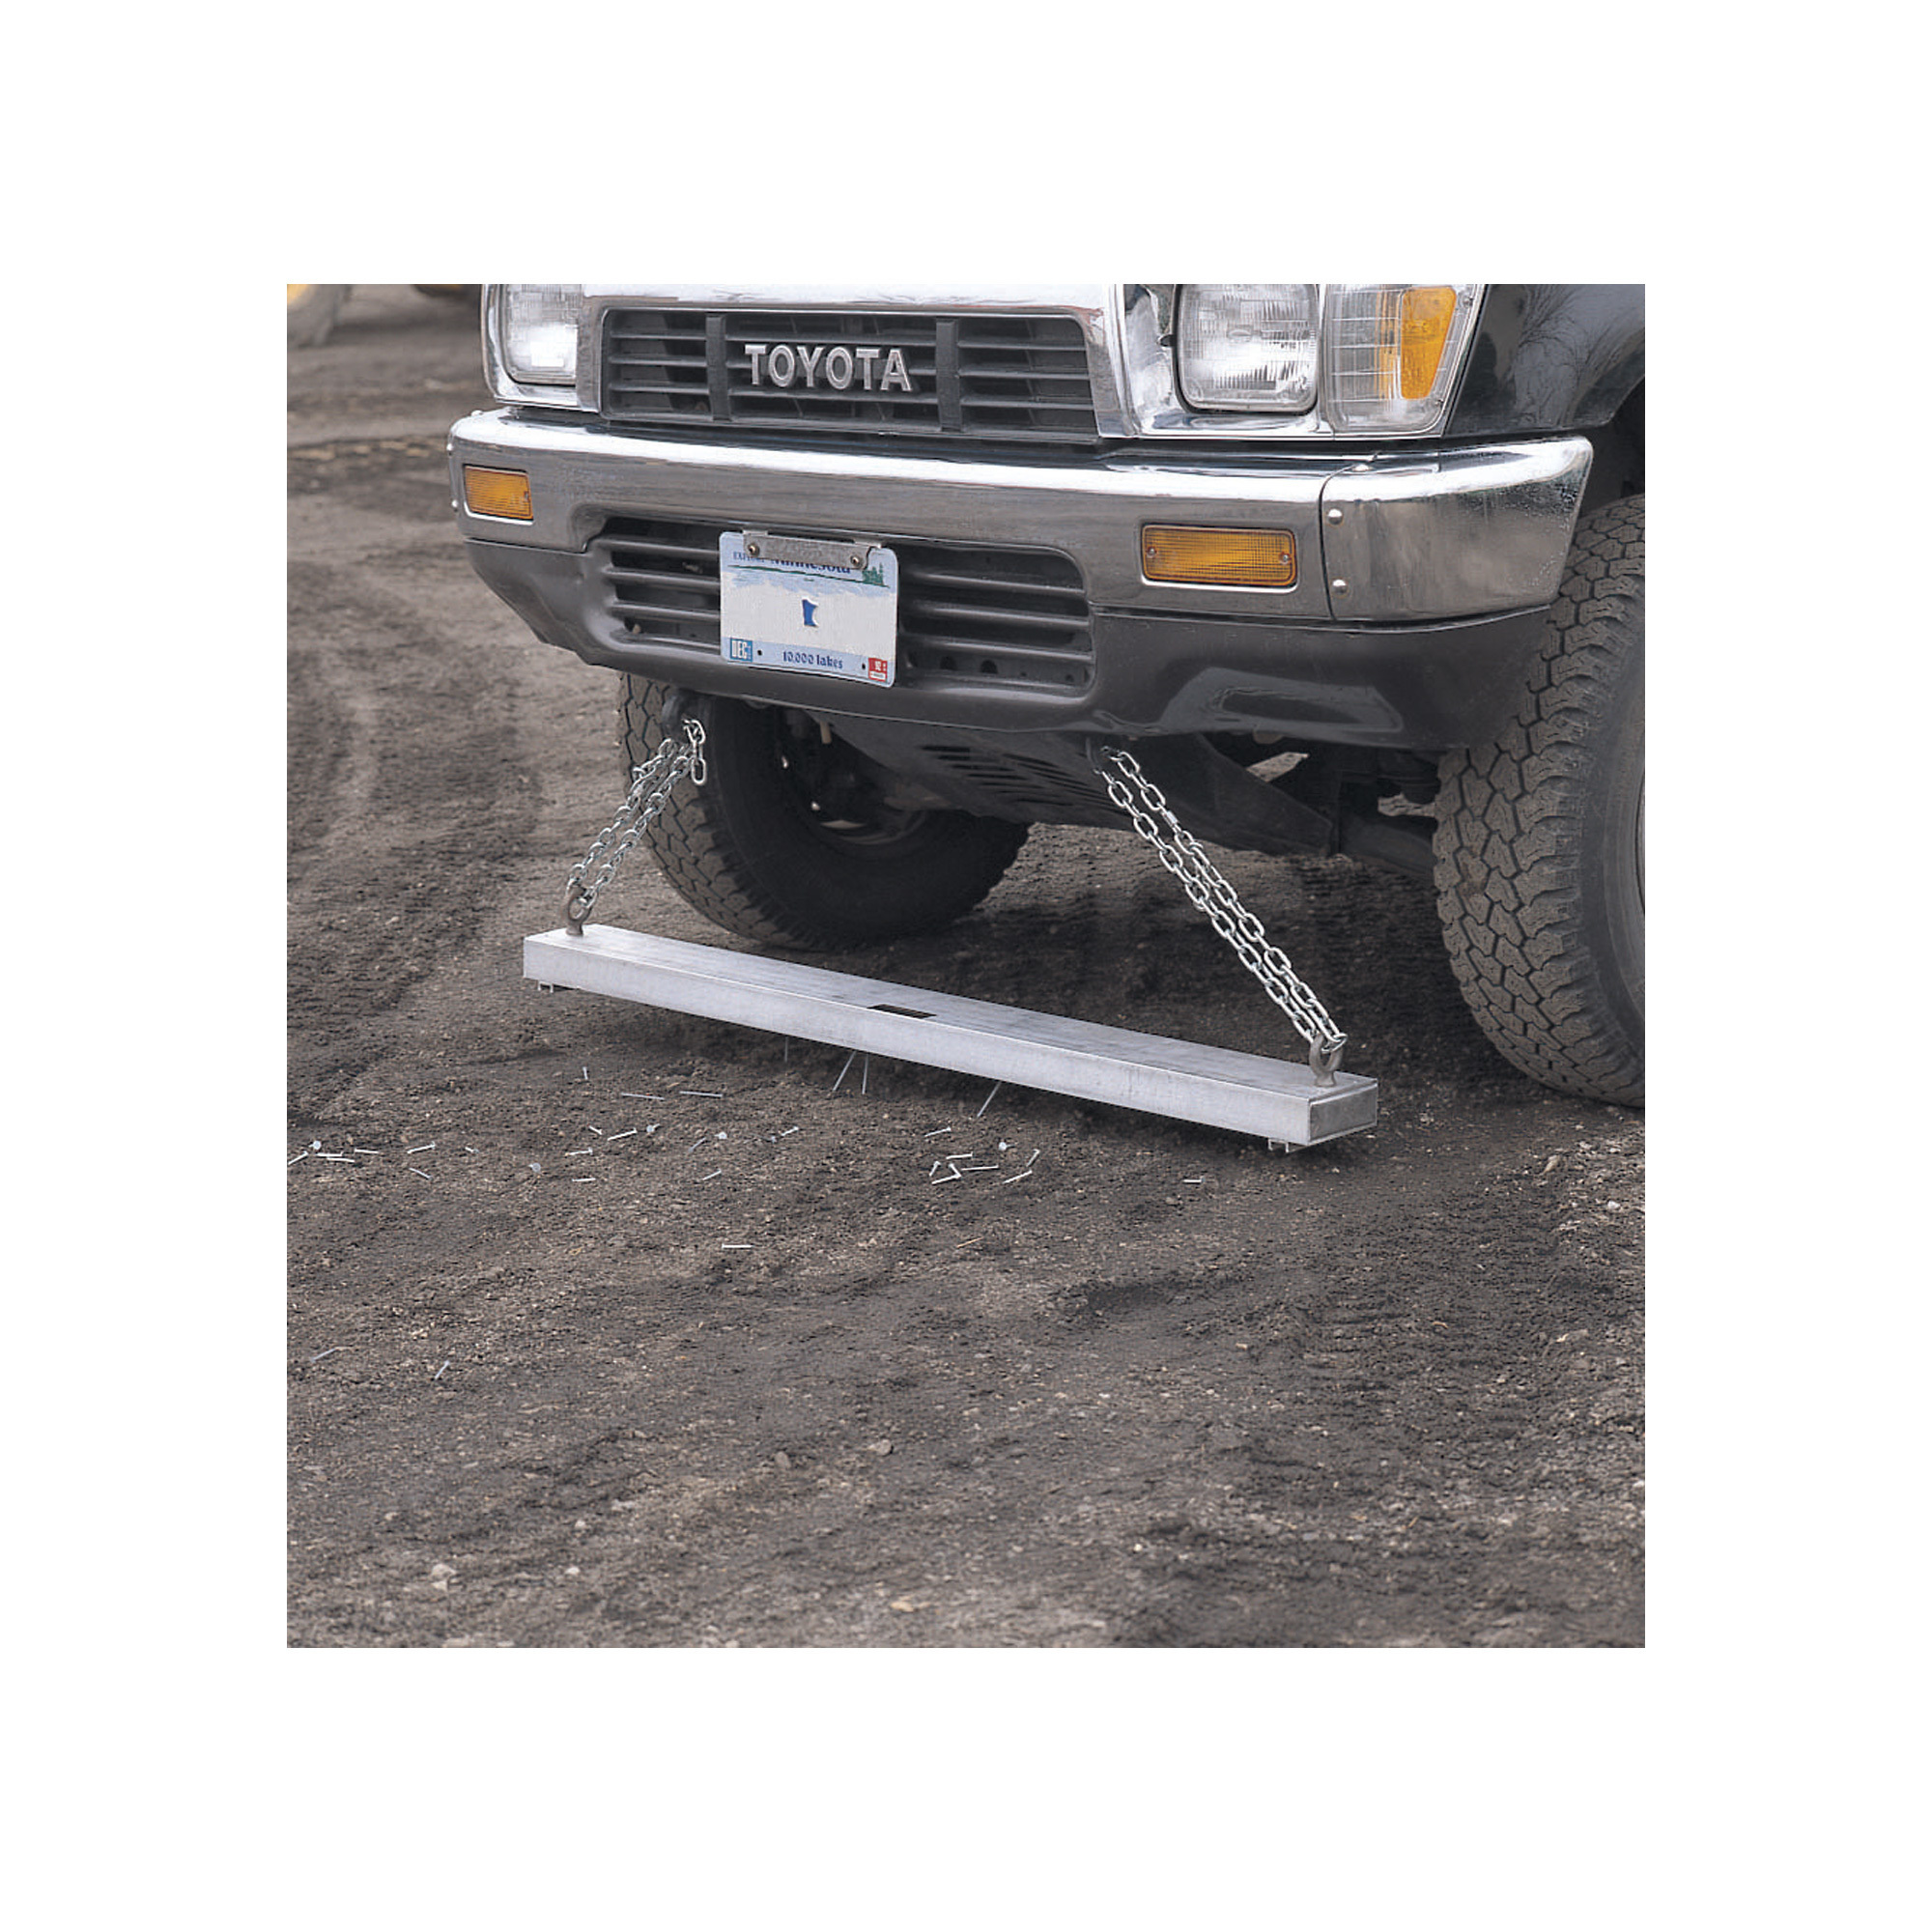 AMK Manufacturing Roadmag Magnetic Sweeper-- 60Inch Length, Model R60